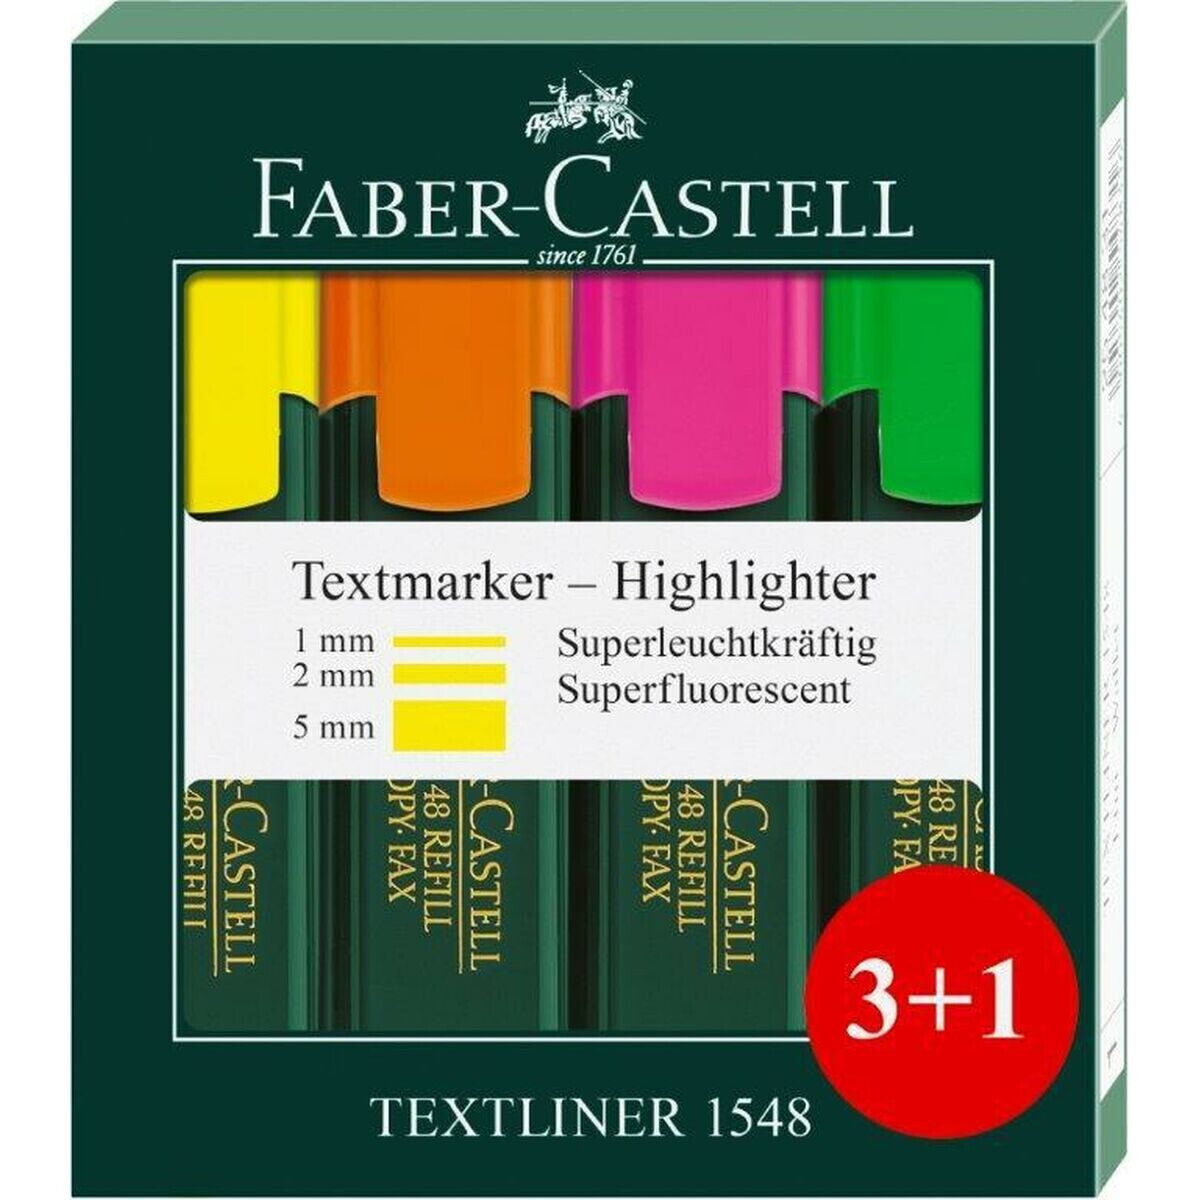 Highlighter Faber-Castell 4 Pieces (65 Units)